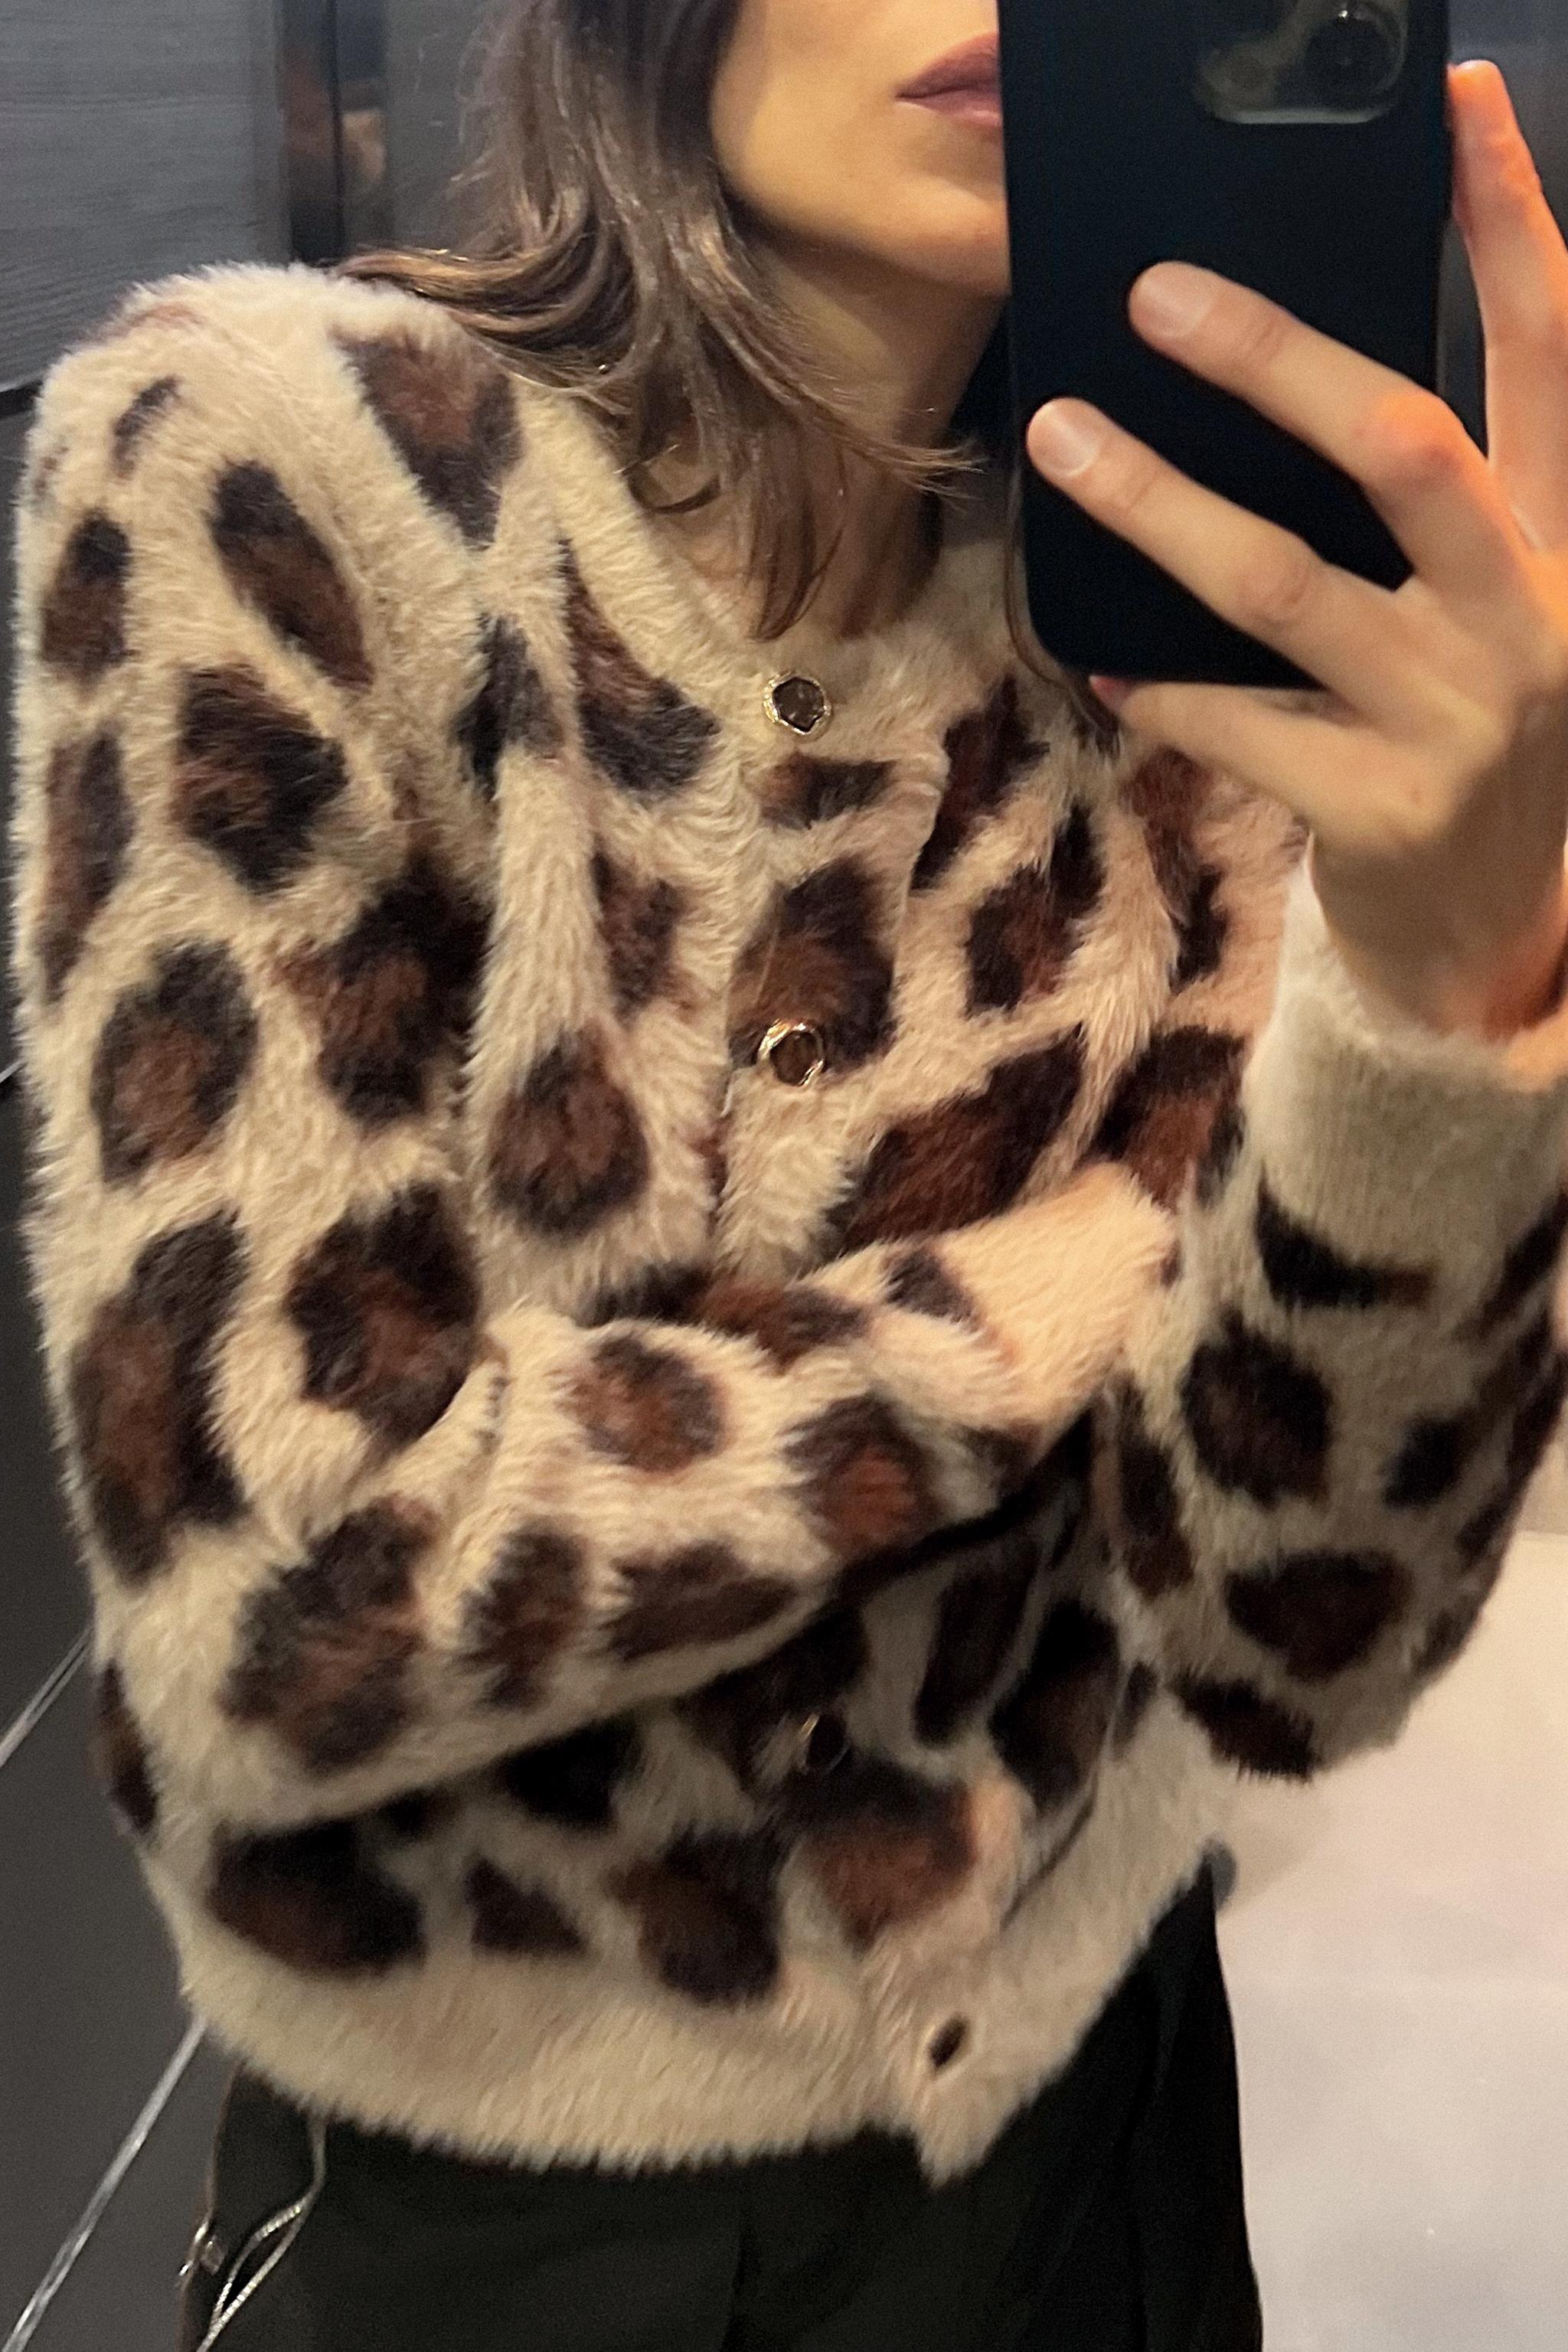 NWT ZARA TEXTURED LEOPARD PRINT COAT FAUX FUR DOUBLE-BREASTED 7418/241